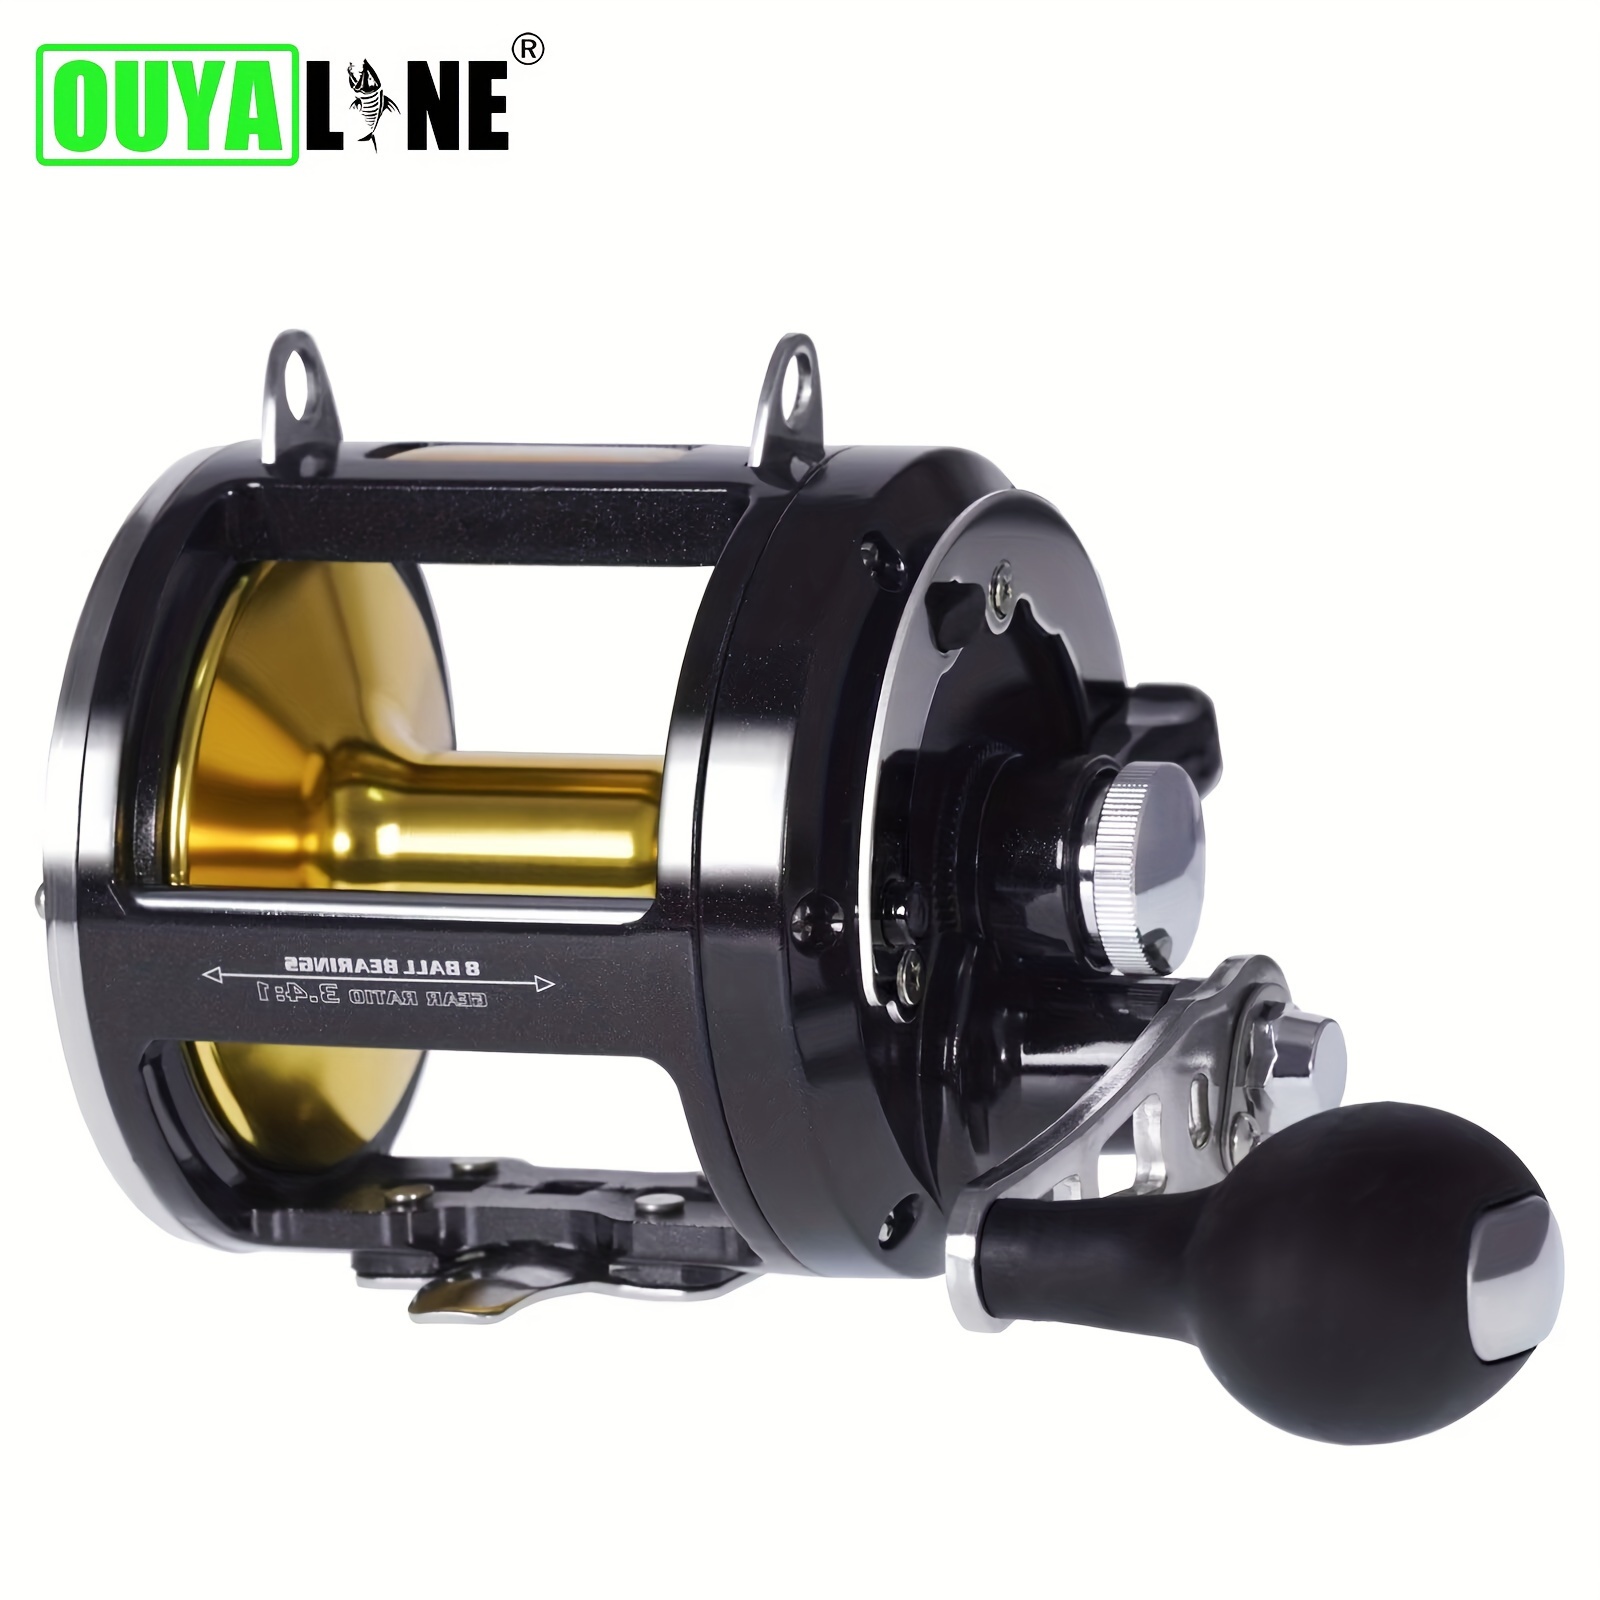 * Big Trolling Drum Aluminum Alloy Right Hand Fishing Reel, 3.4:1 Gear  Ratio, 8+1BB Max Drag 30kg/66.14lb, Fishing Accessories For Saltwater